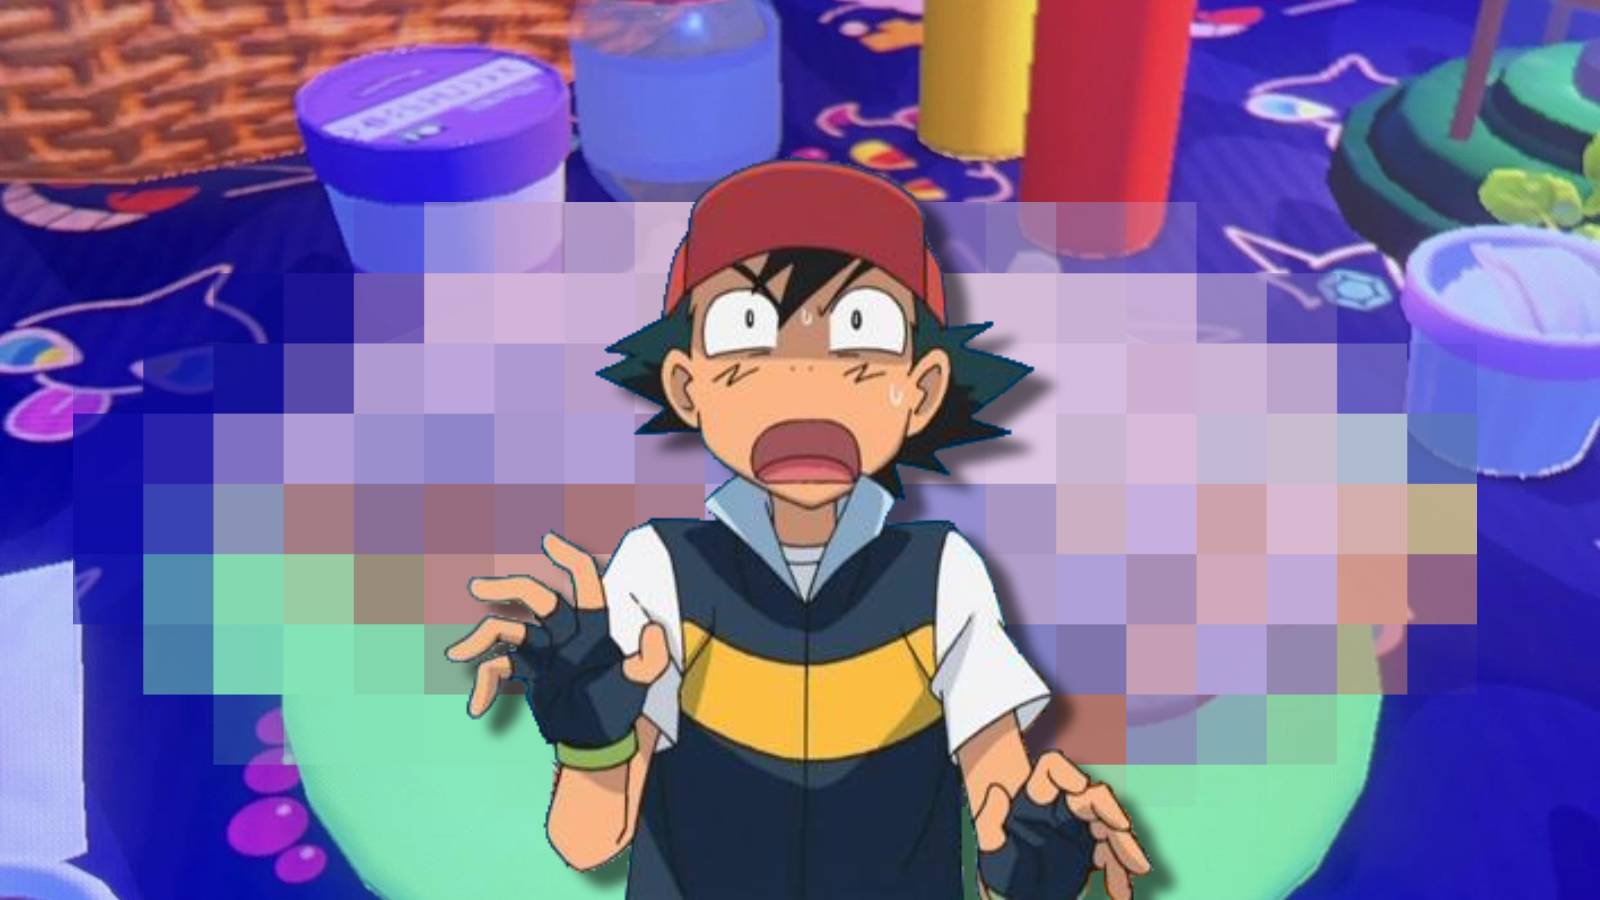 Ash ketchum looks shocked, pictured in front of a picture of a pixelated sandwich